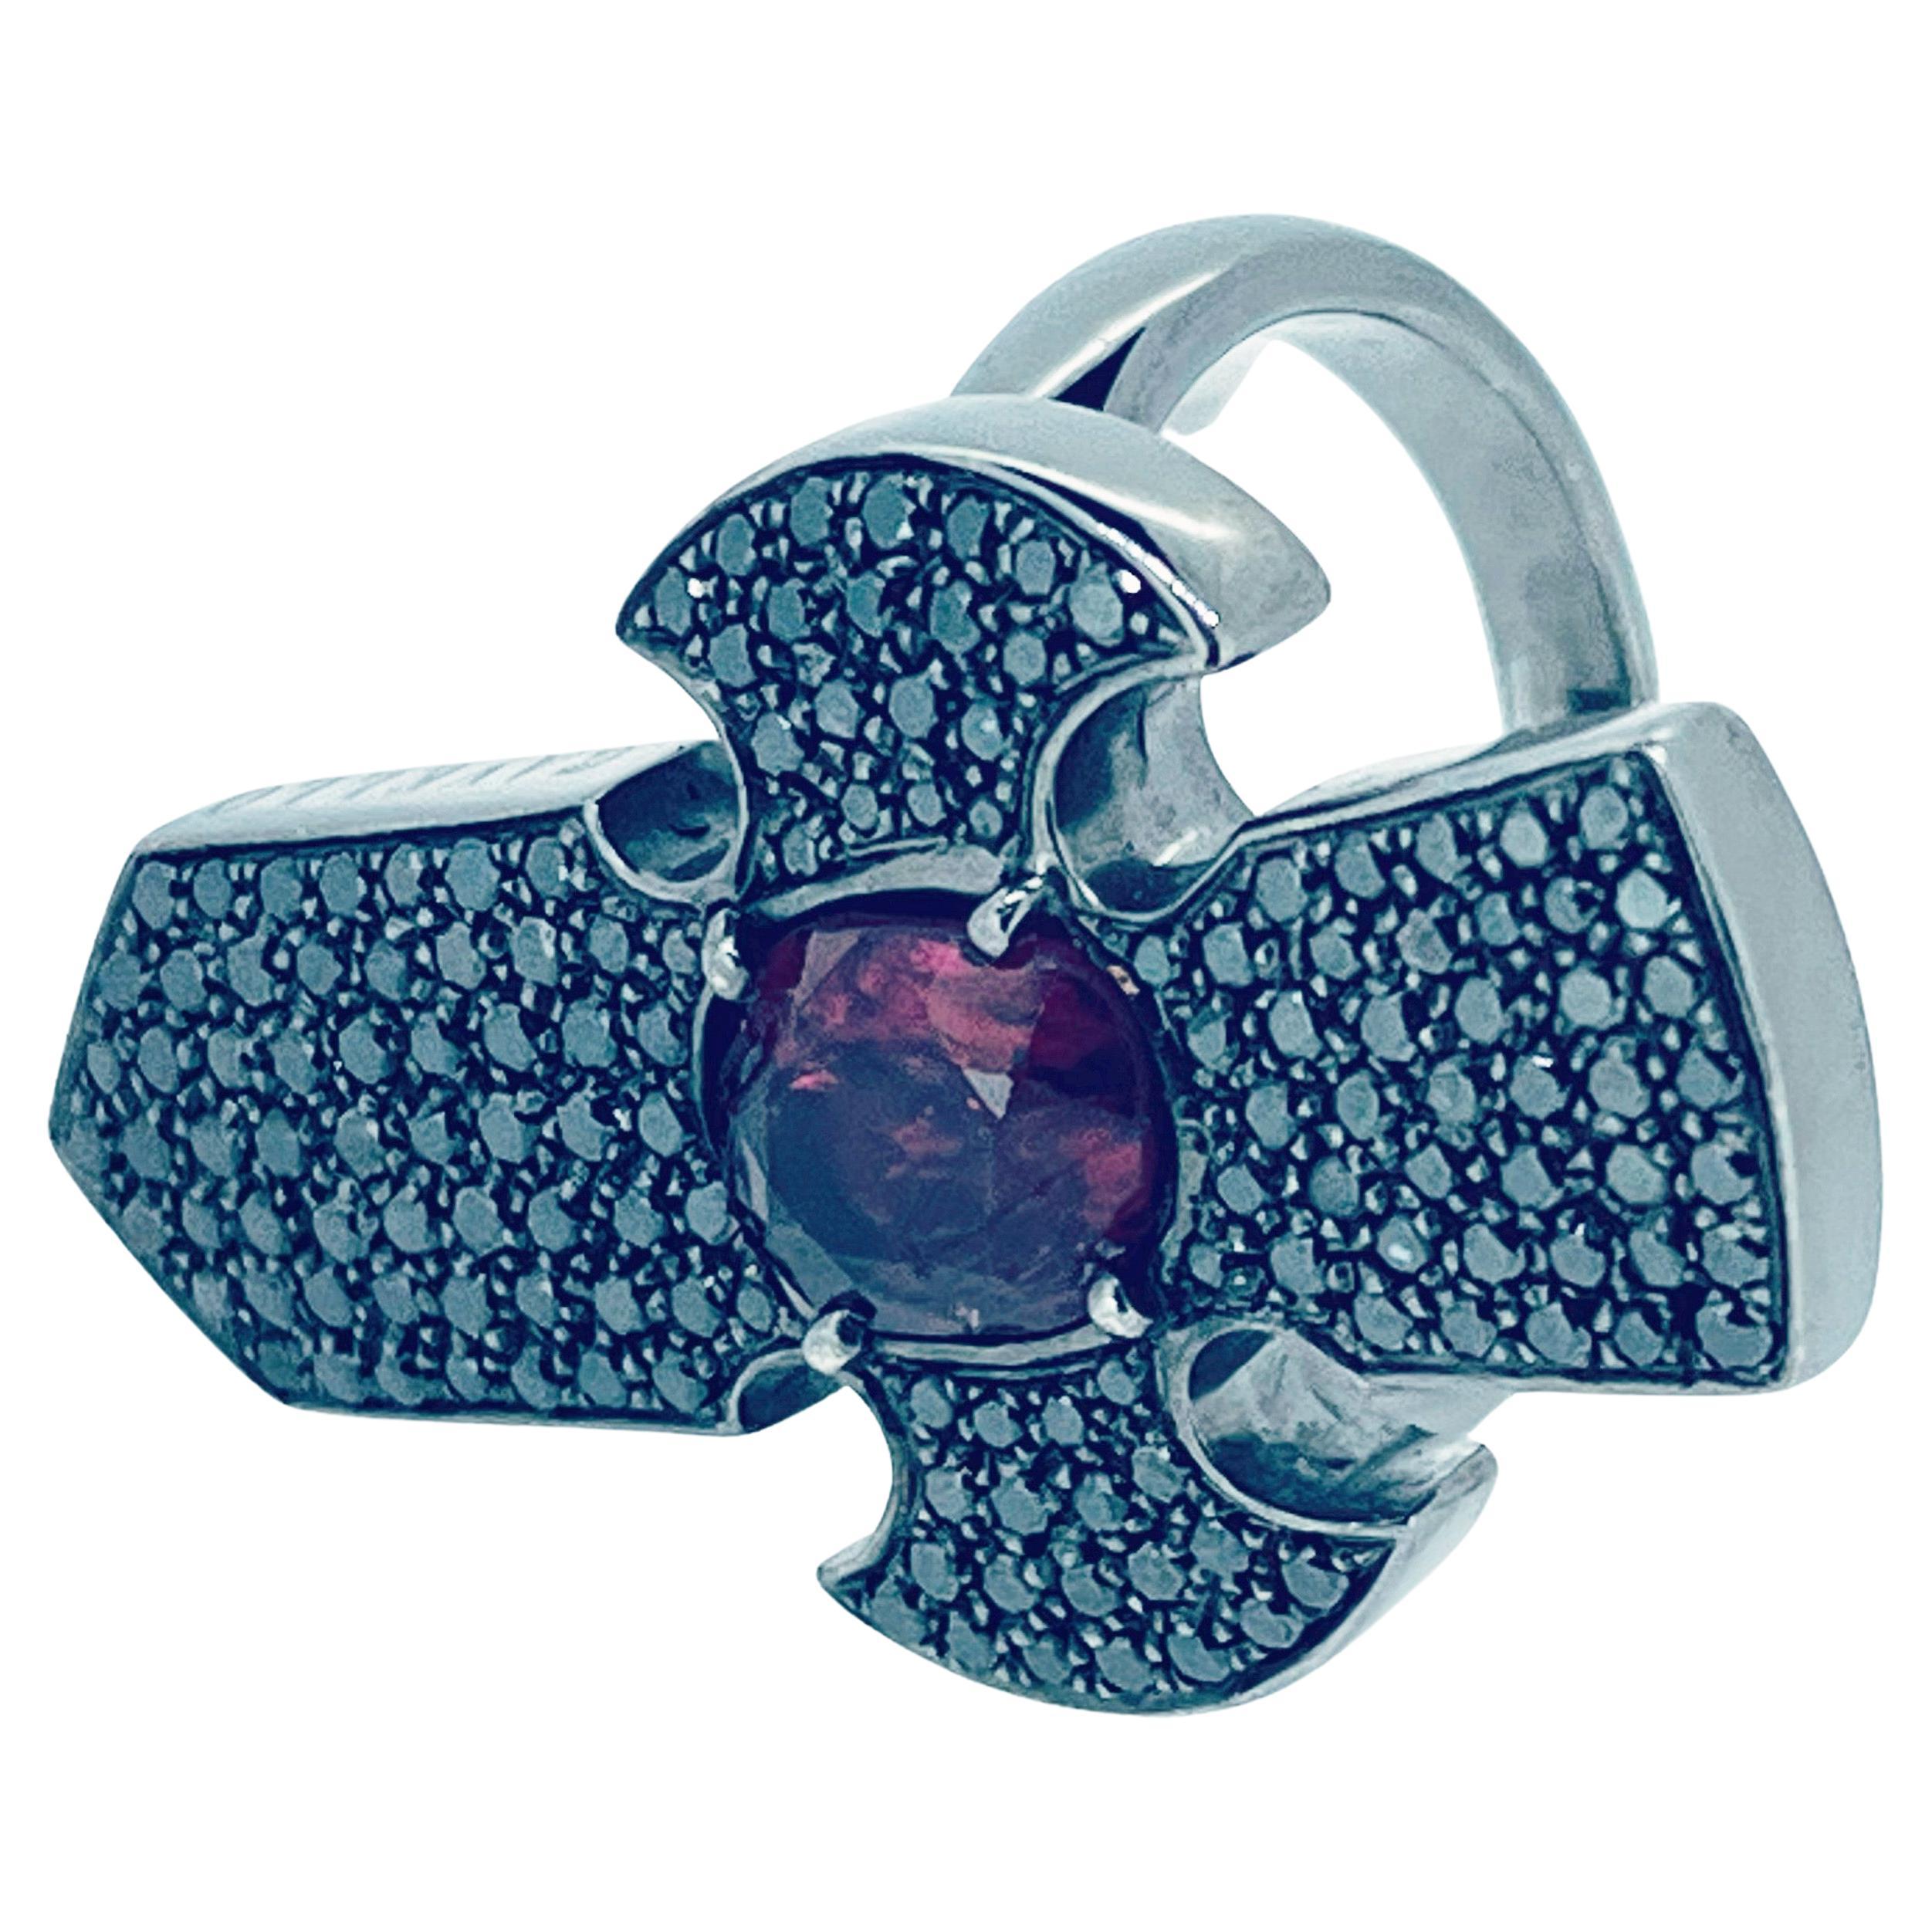 Gavello 18ct Black Rhodium Cross Ring with 1.2ct Black Diamonds and Ruby Stone For Sale